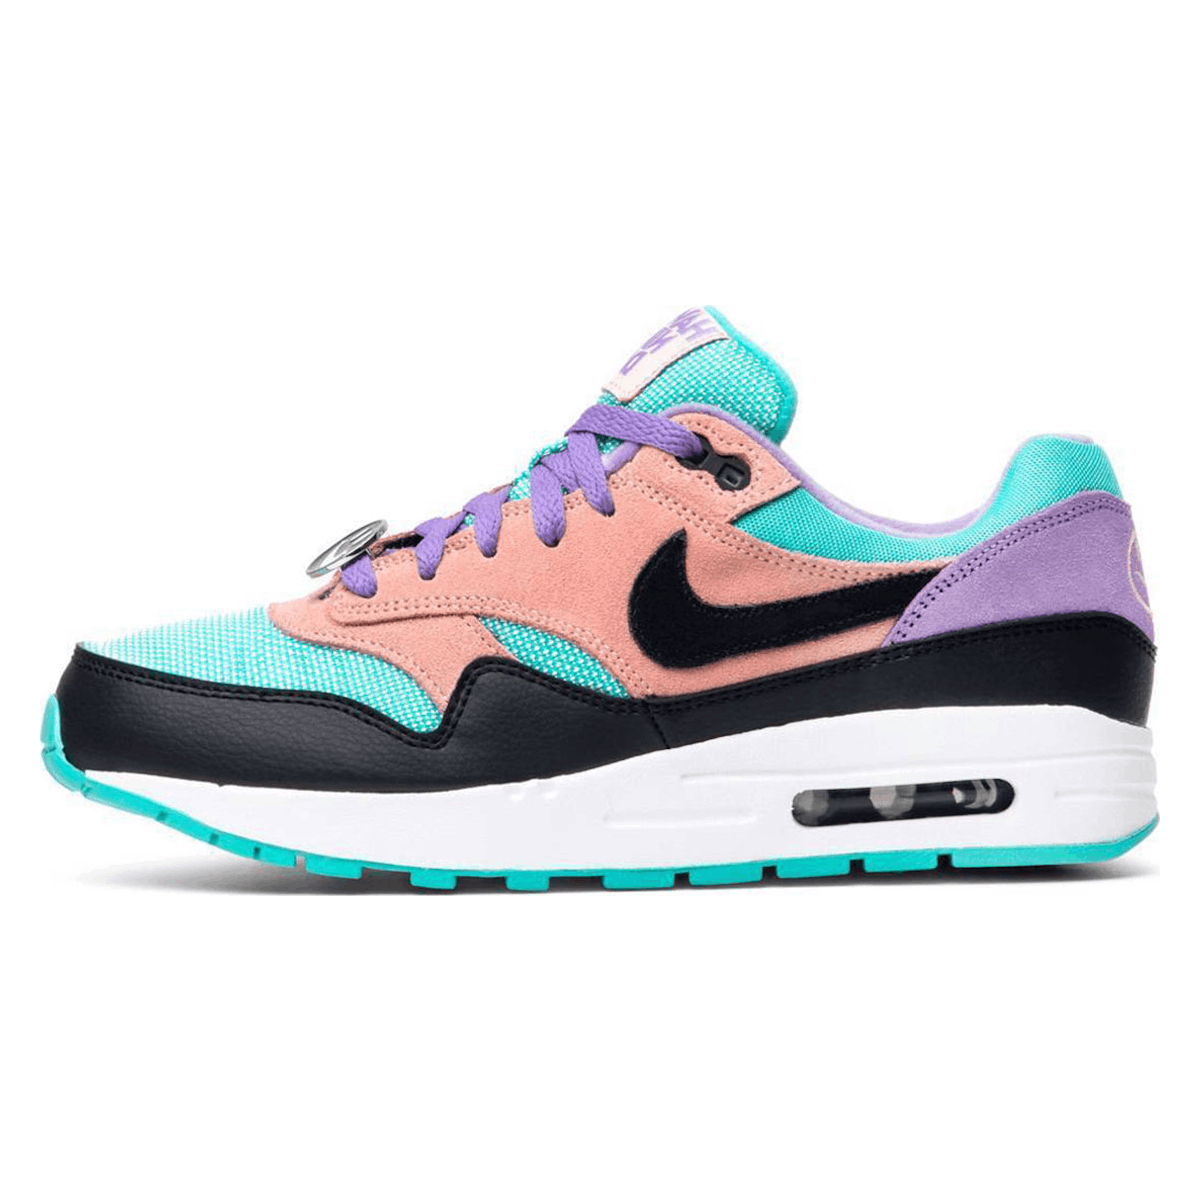 Nike Air Max 1 GS "Have A Nike Day"